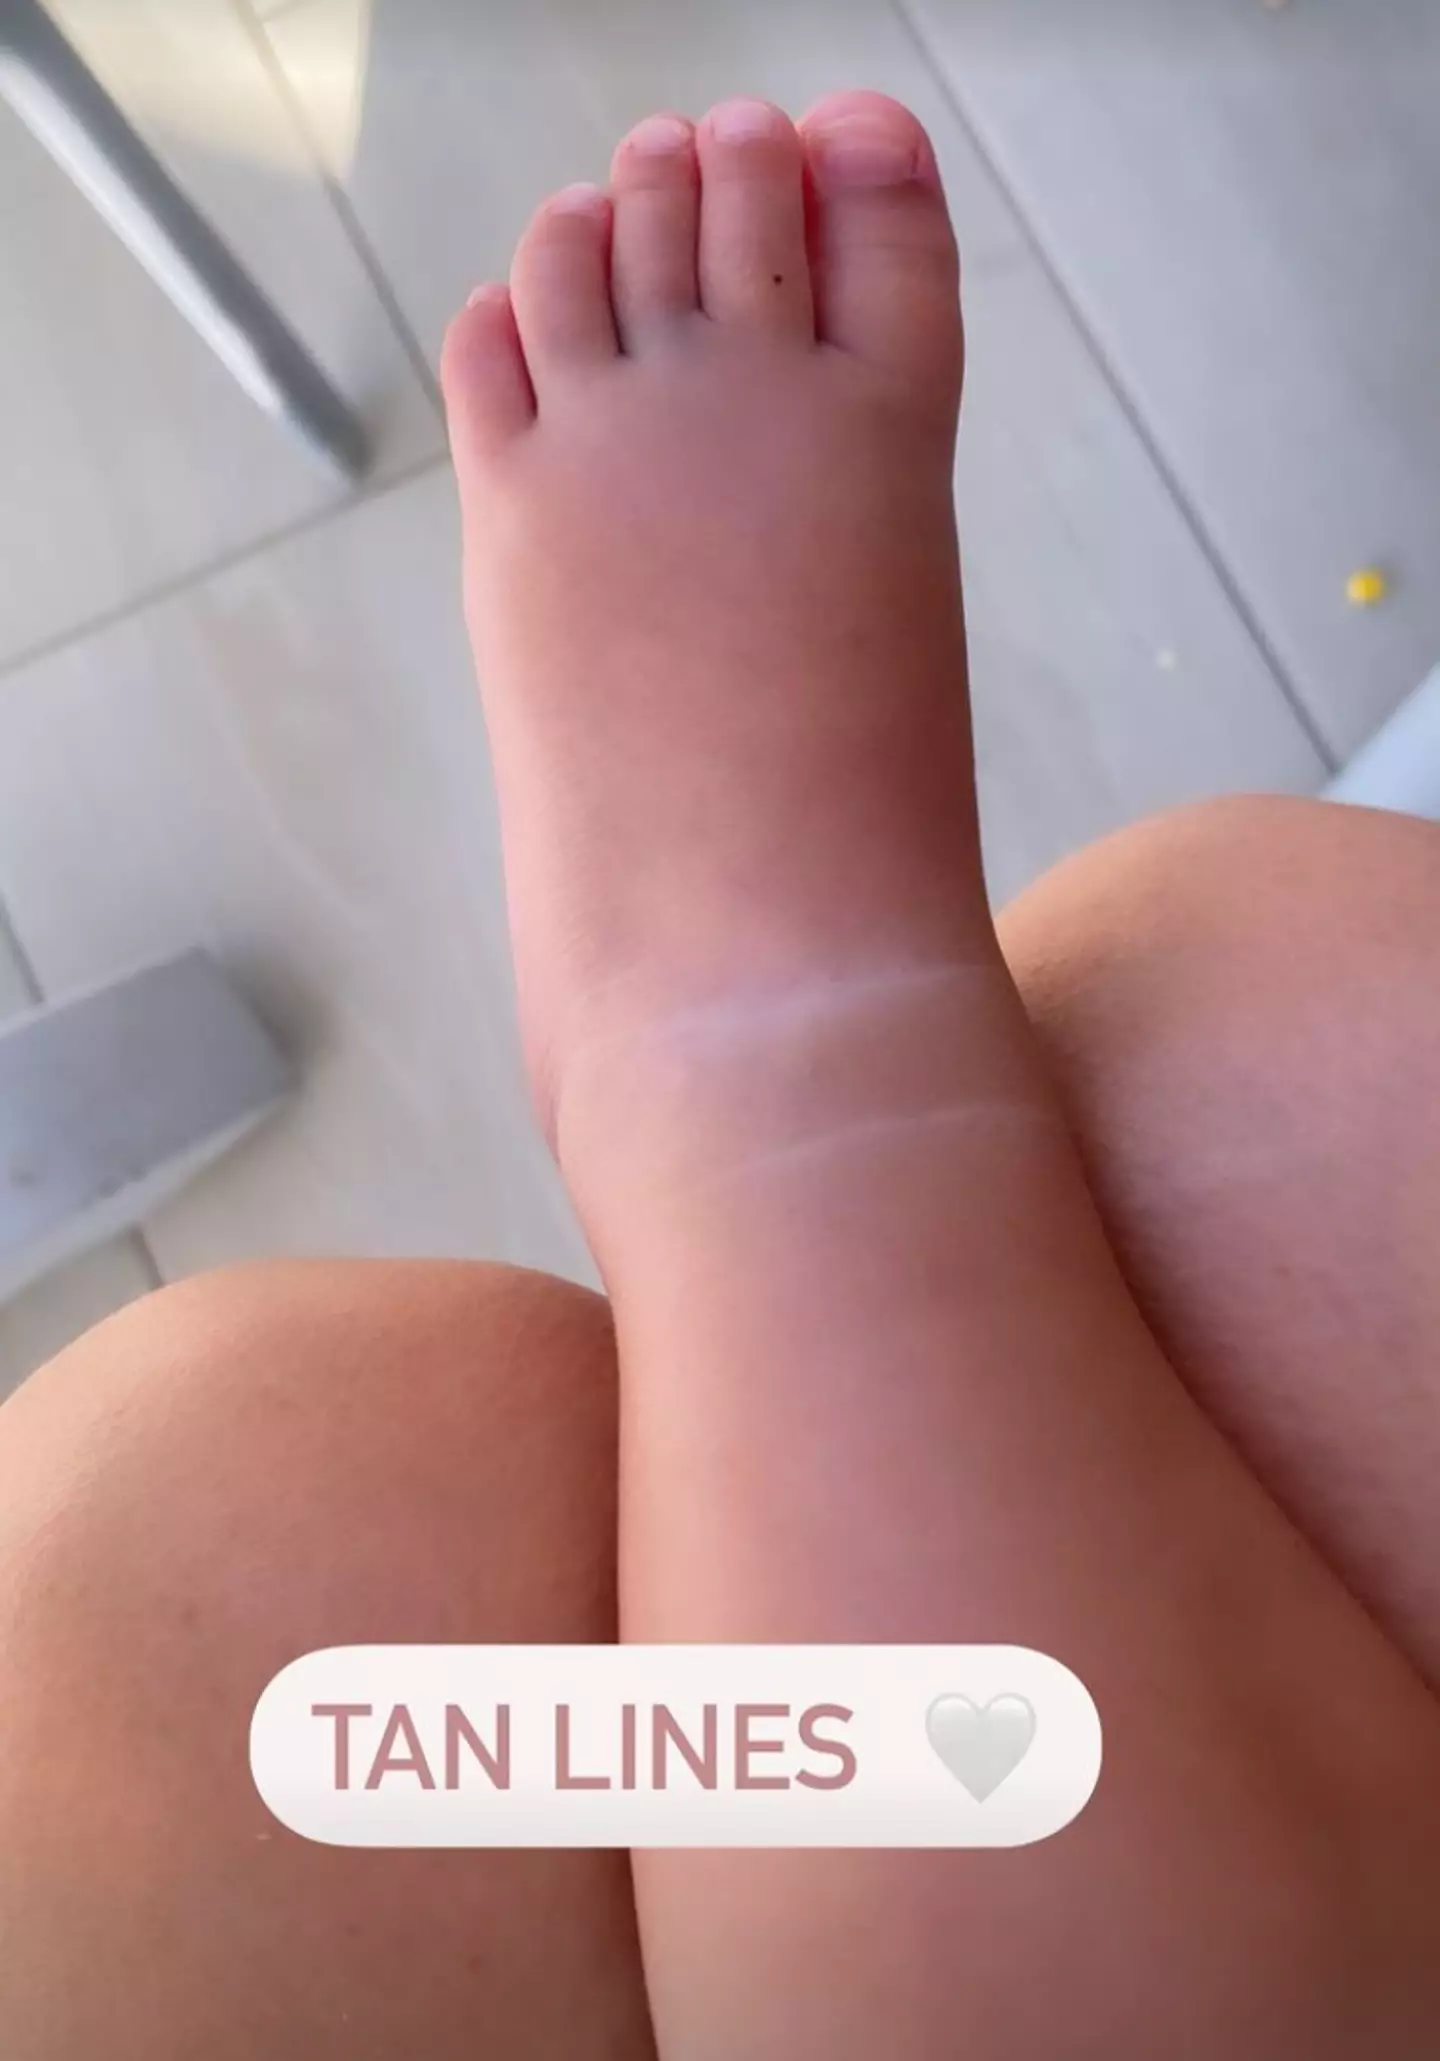 Laura shared an adorable photo of her little one's feet.